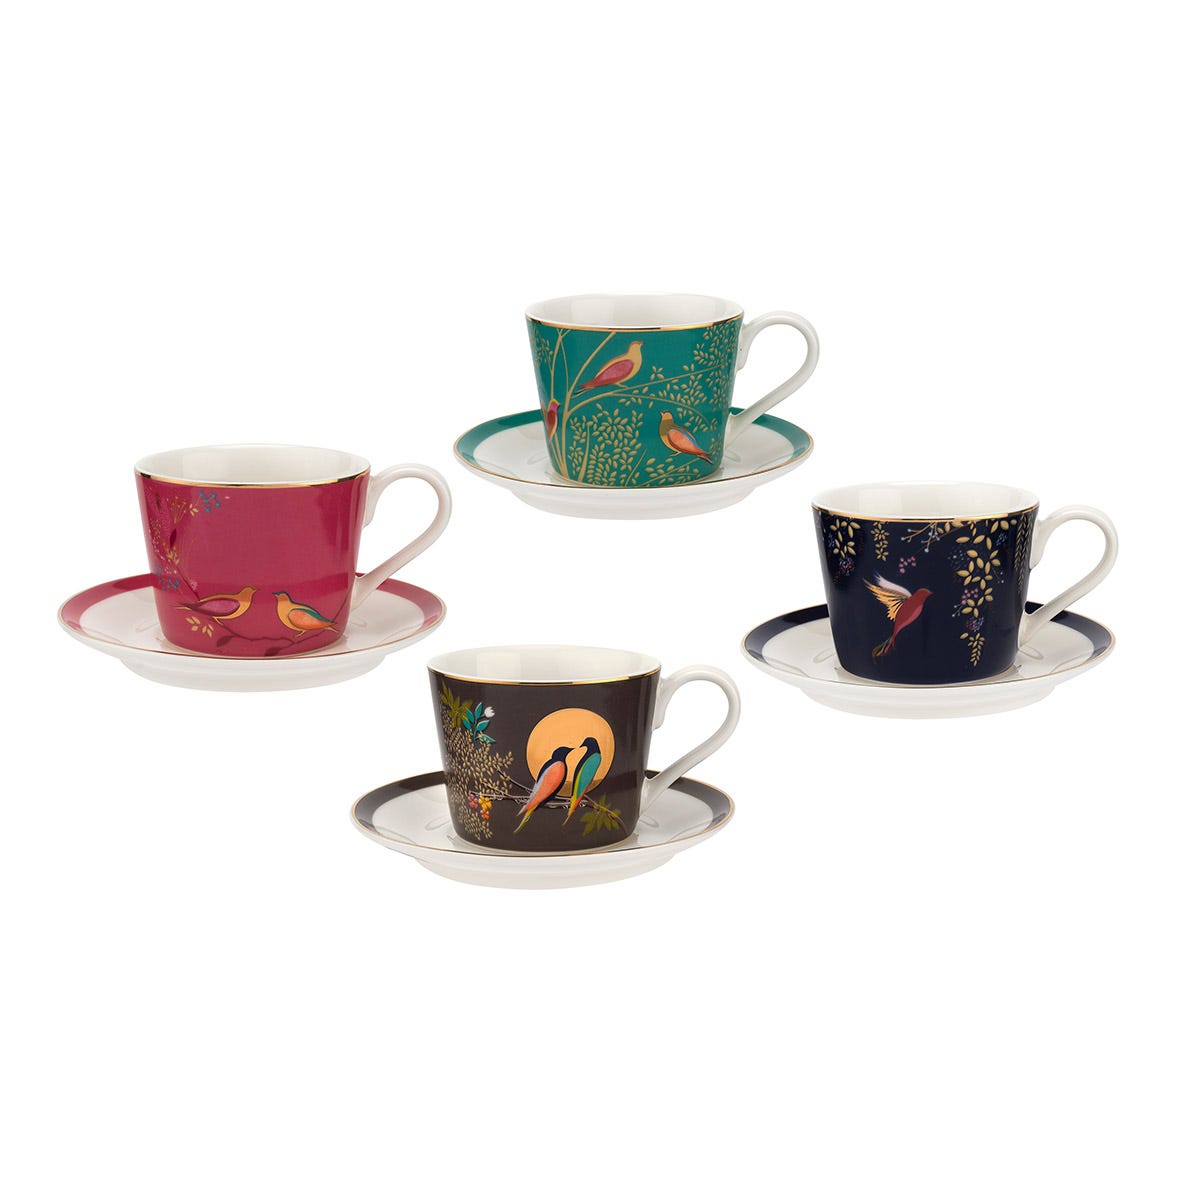 Set of 4 Assorted Colors Sara Miller London for Portmeirion Chelsea Collection Porcelain Espresso Cups and Saucers 4 ounce 